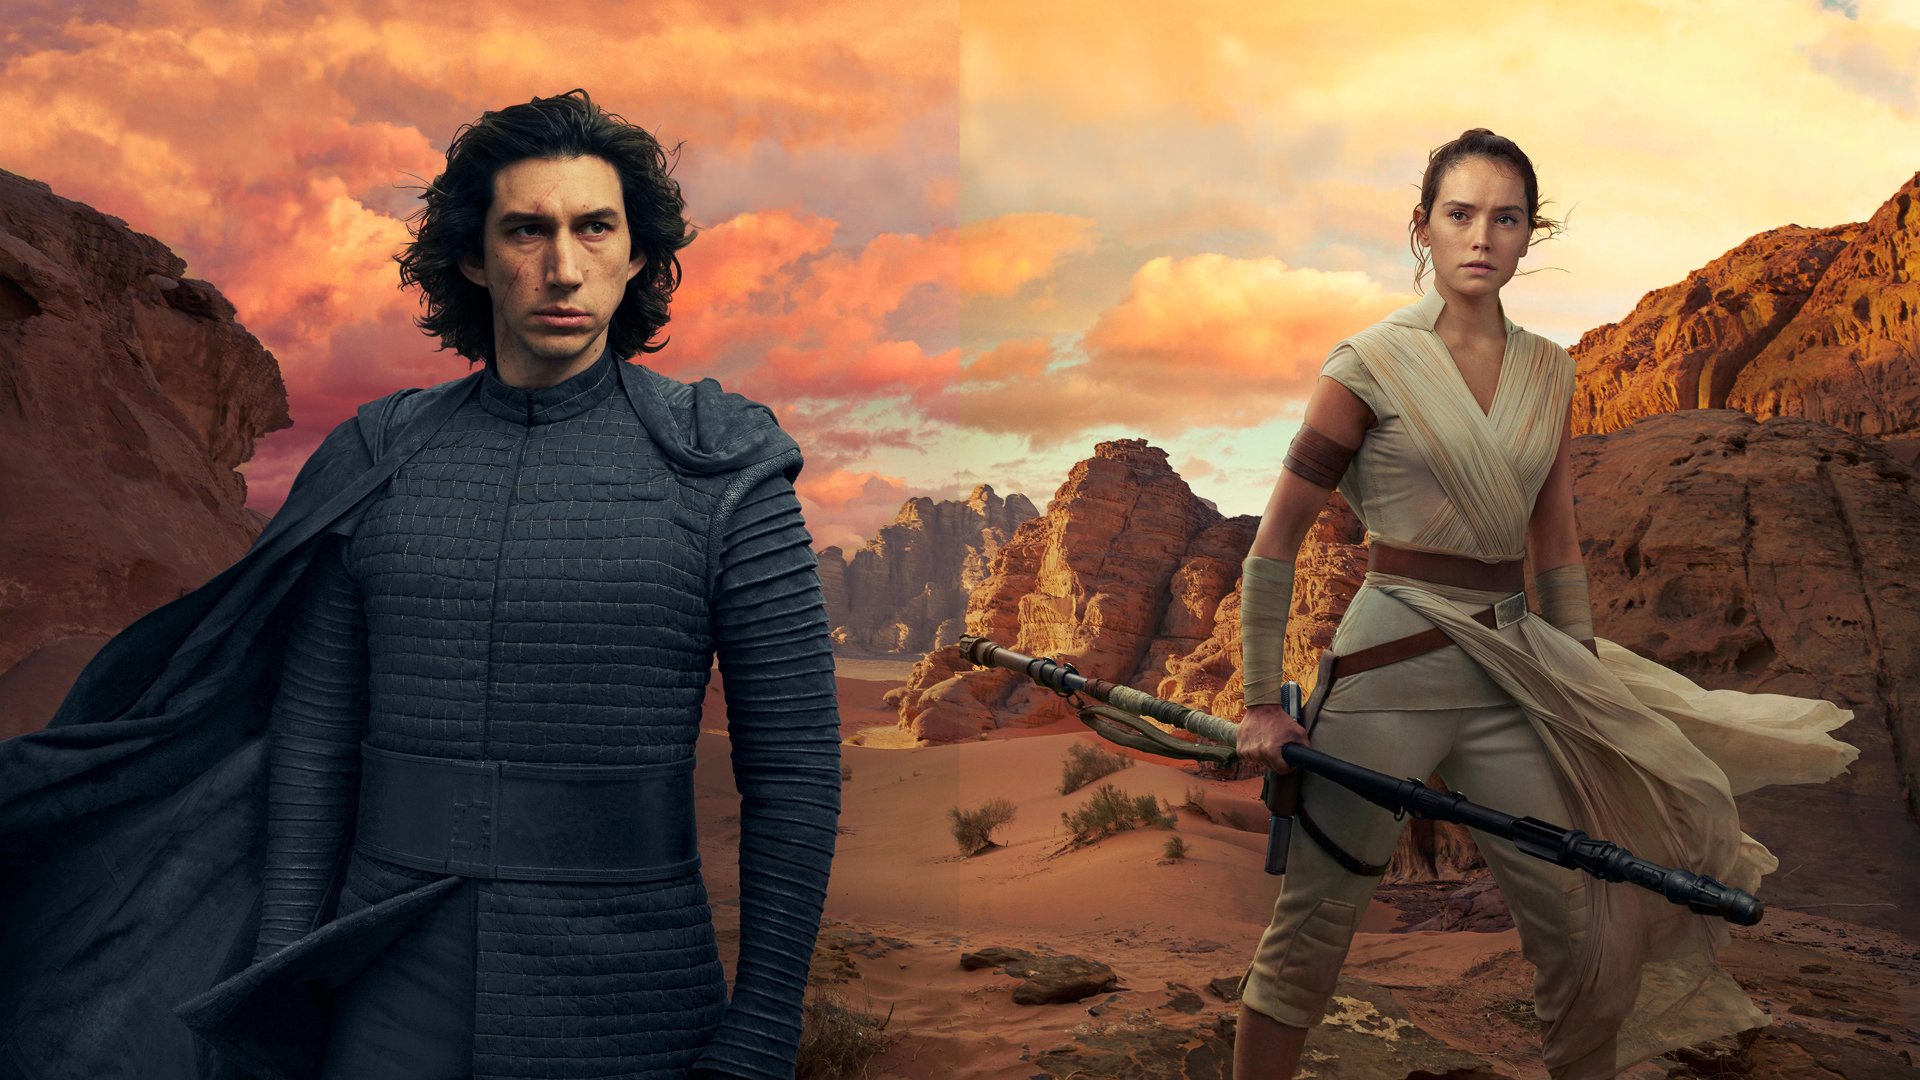 1920x1080 Kylo Ren And Rey In Star Wars The Rise Of Skywalker Images, Photos, Reviews